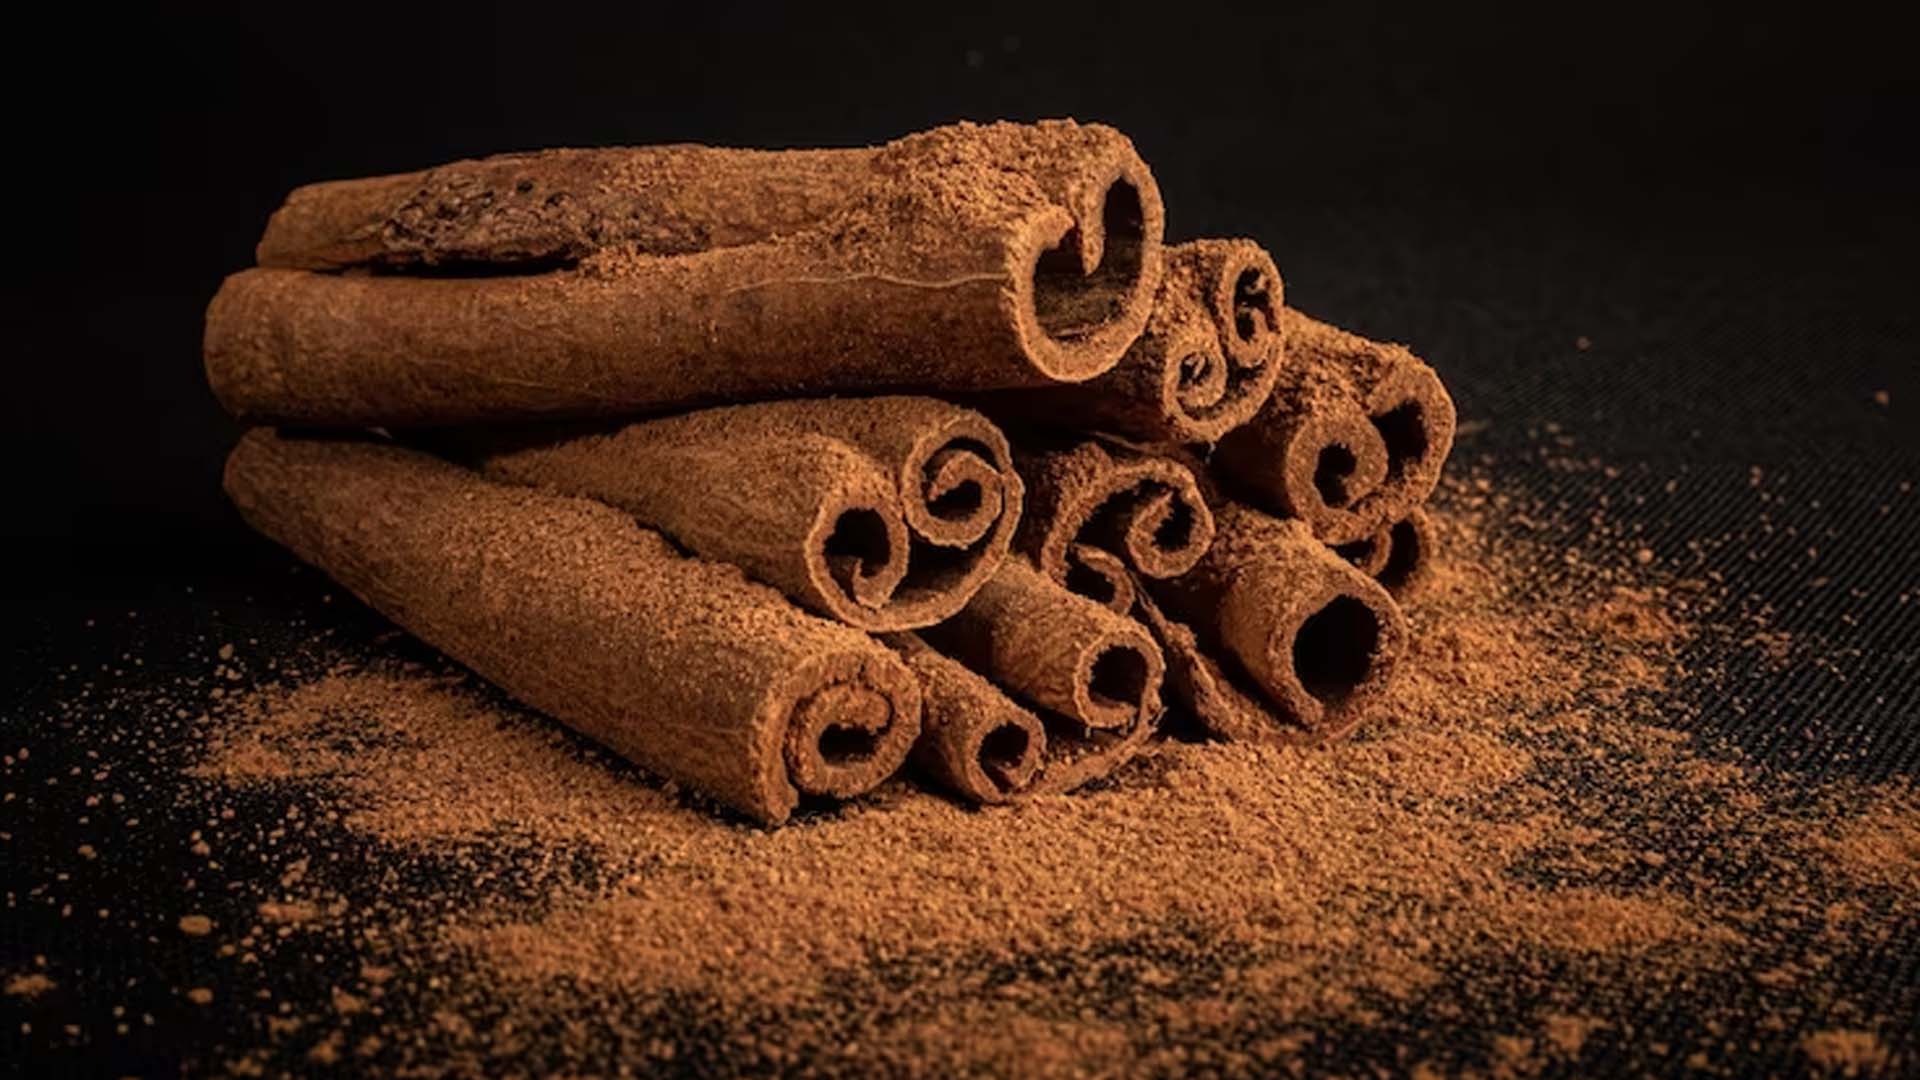 Does Cinnamon Have any Health Benefits?